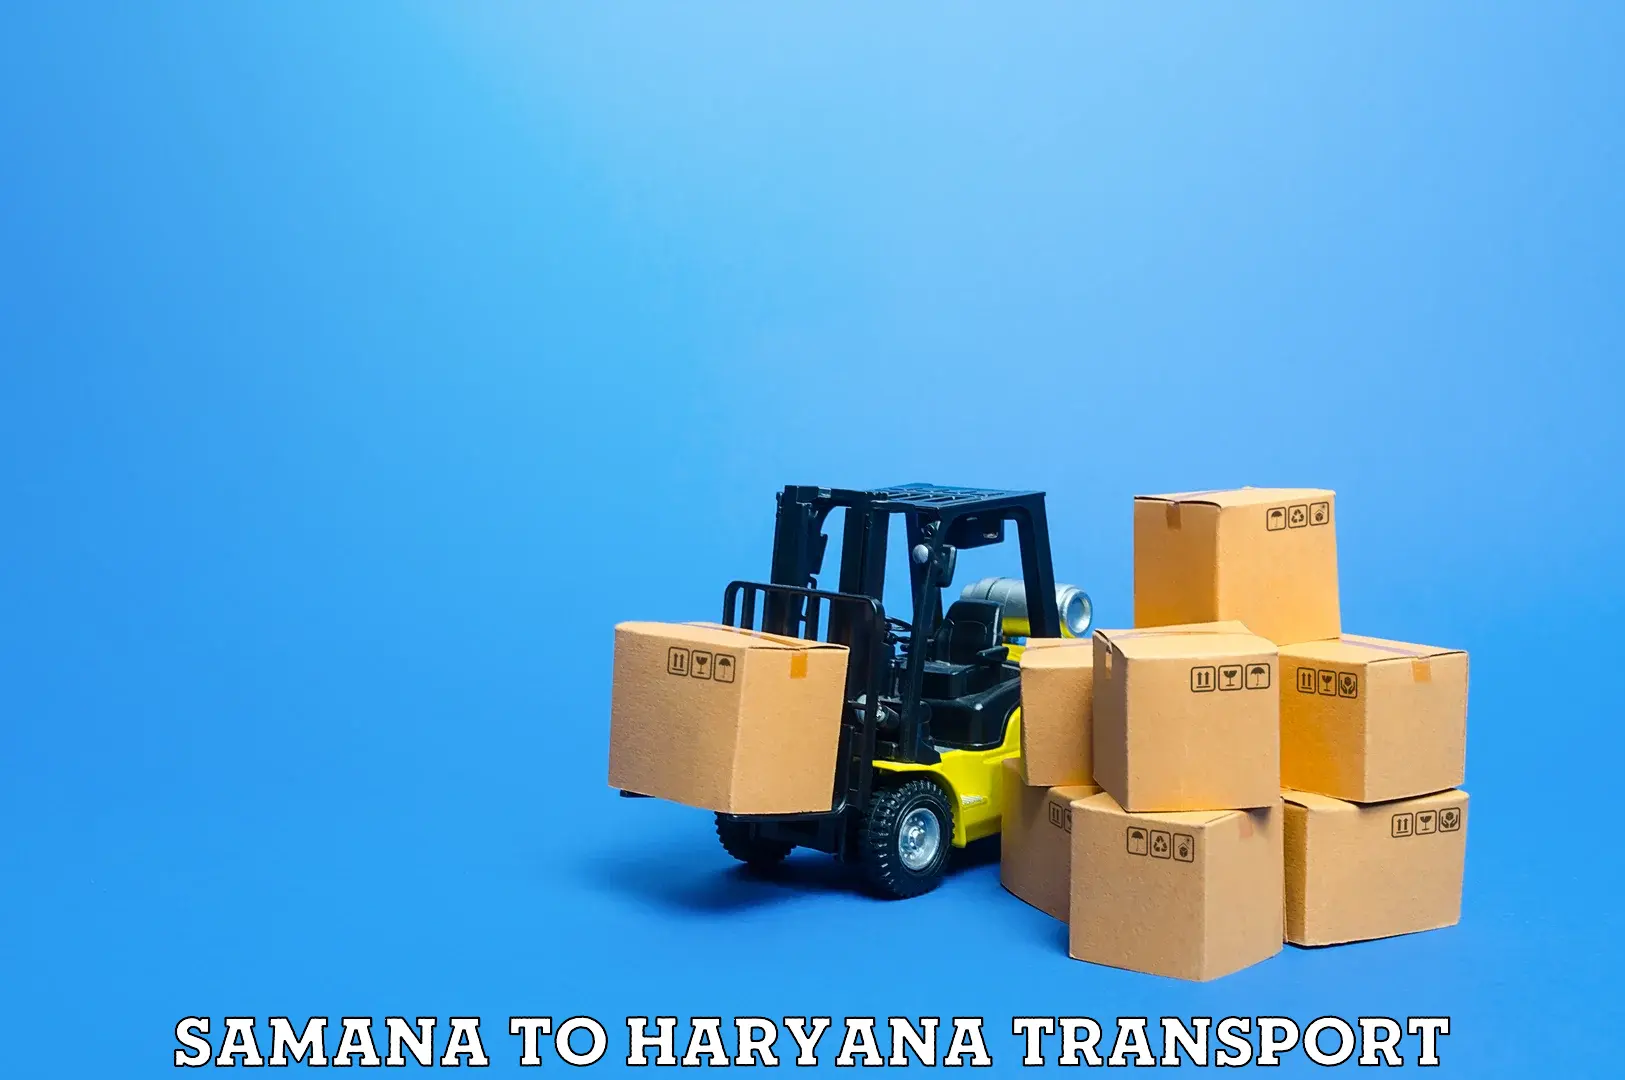 Transport bike from one state to another in Samana to NCR Haryana